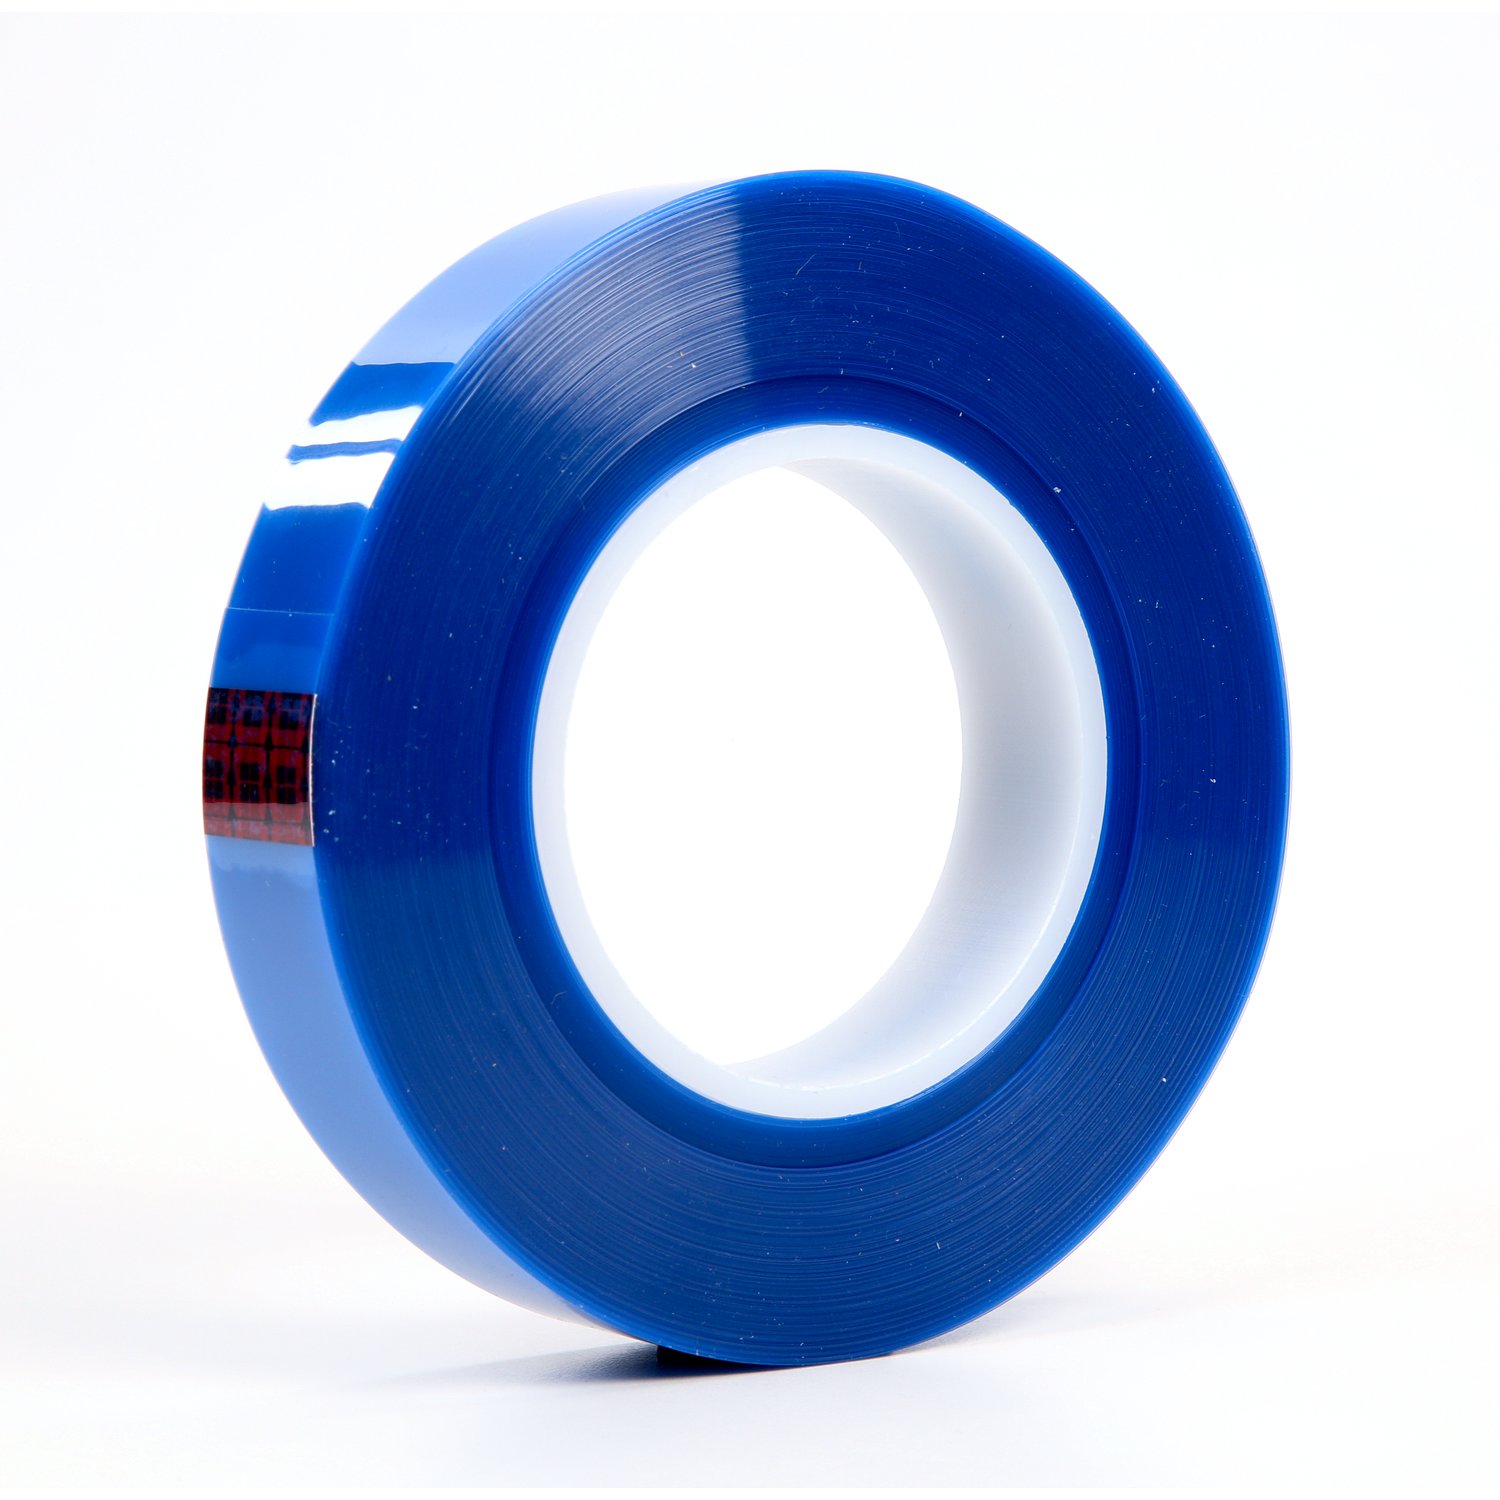 7000036203 - 3M Polyester Tape 8905, Blue, 1 in x 72 yd, 6.4 mil, 36 rolls per case,
Plastic Core